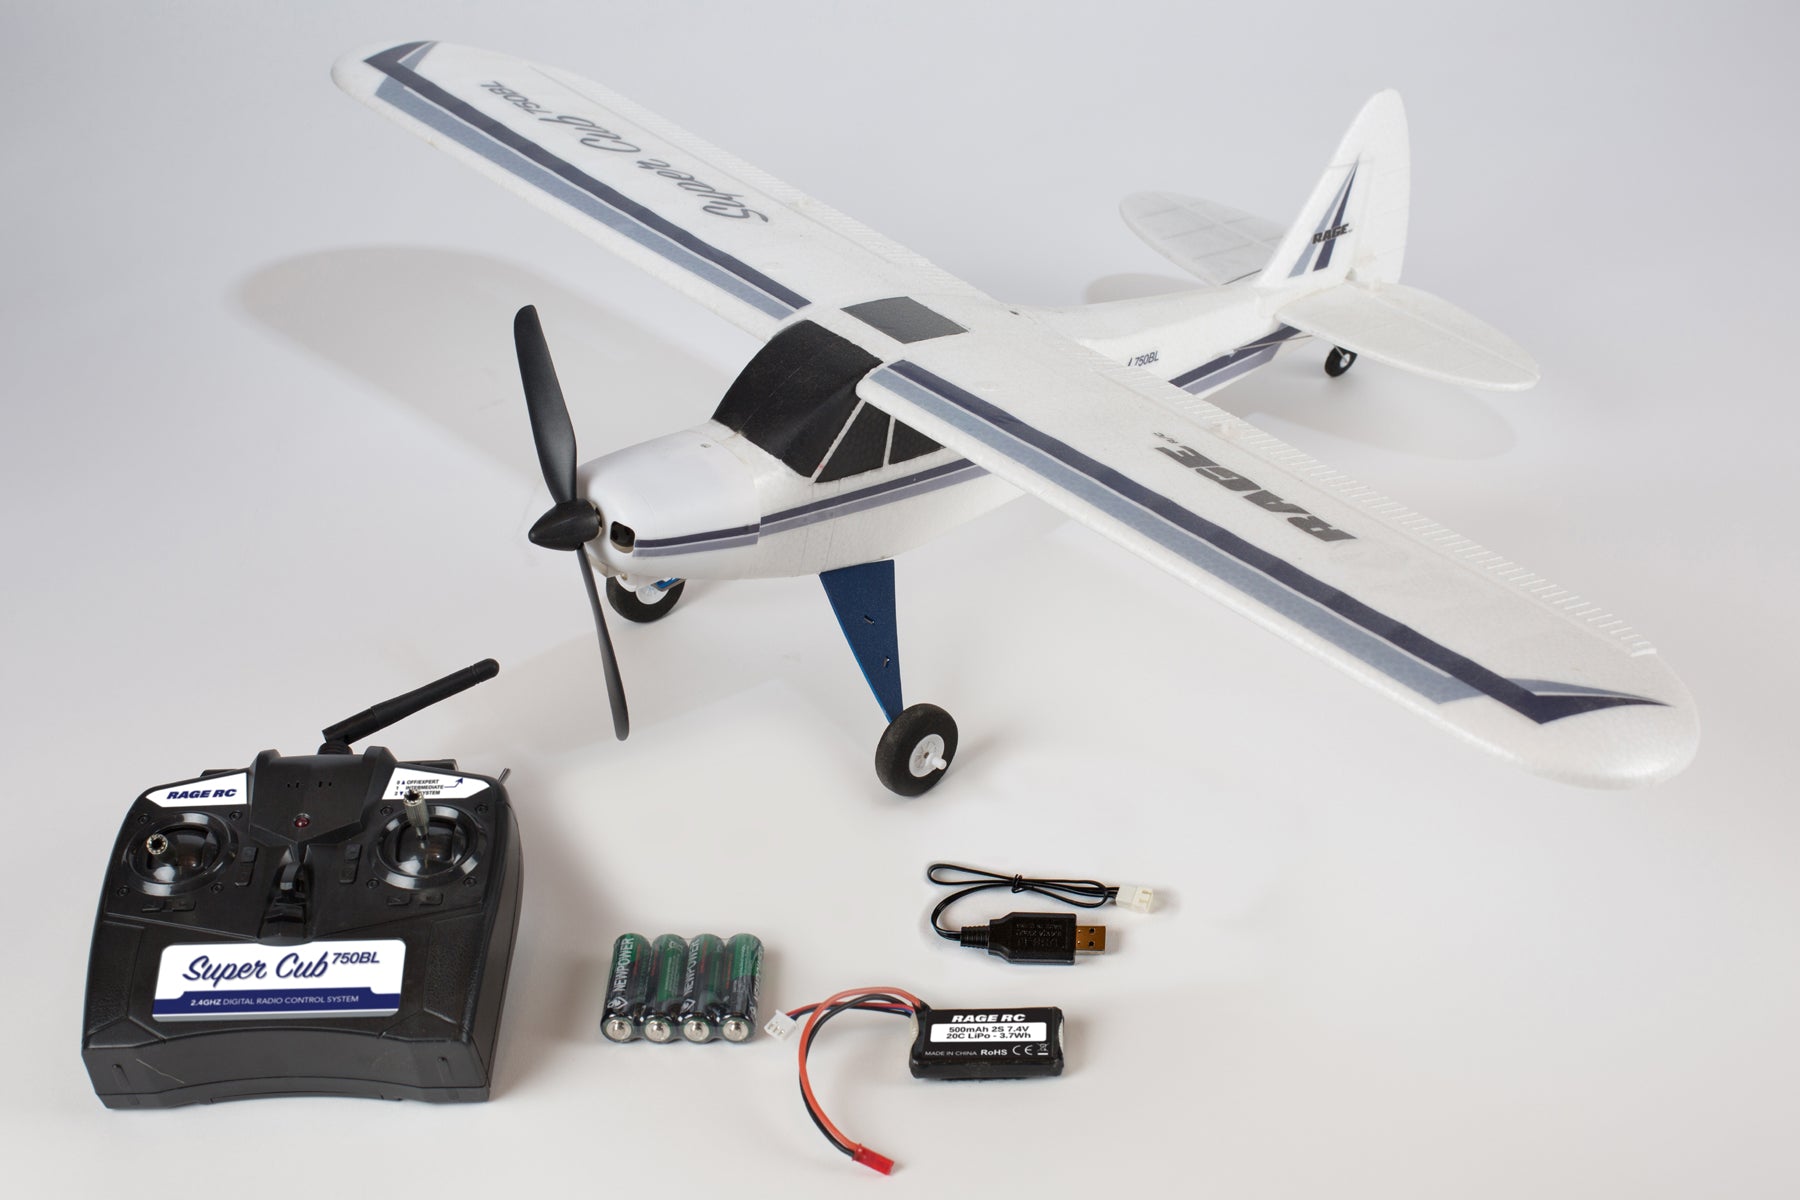 RAGE RGRA1500 Super Cub 750 Brushless RTF 4-Channel Aircraft with PASS (Pilot Assist Stability Software) System